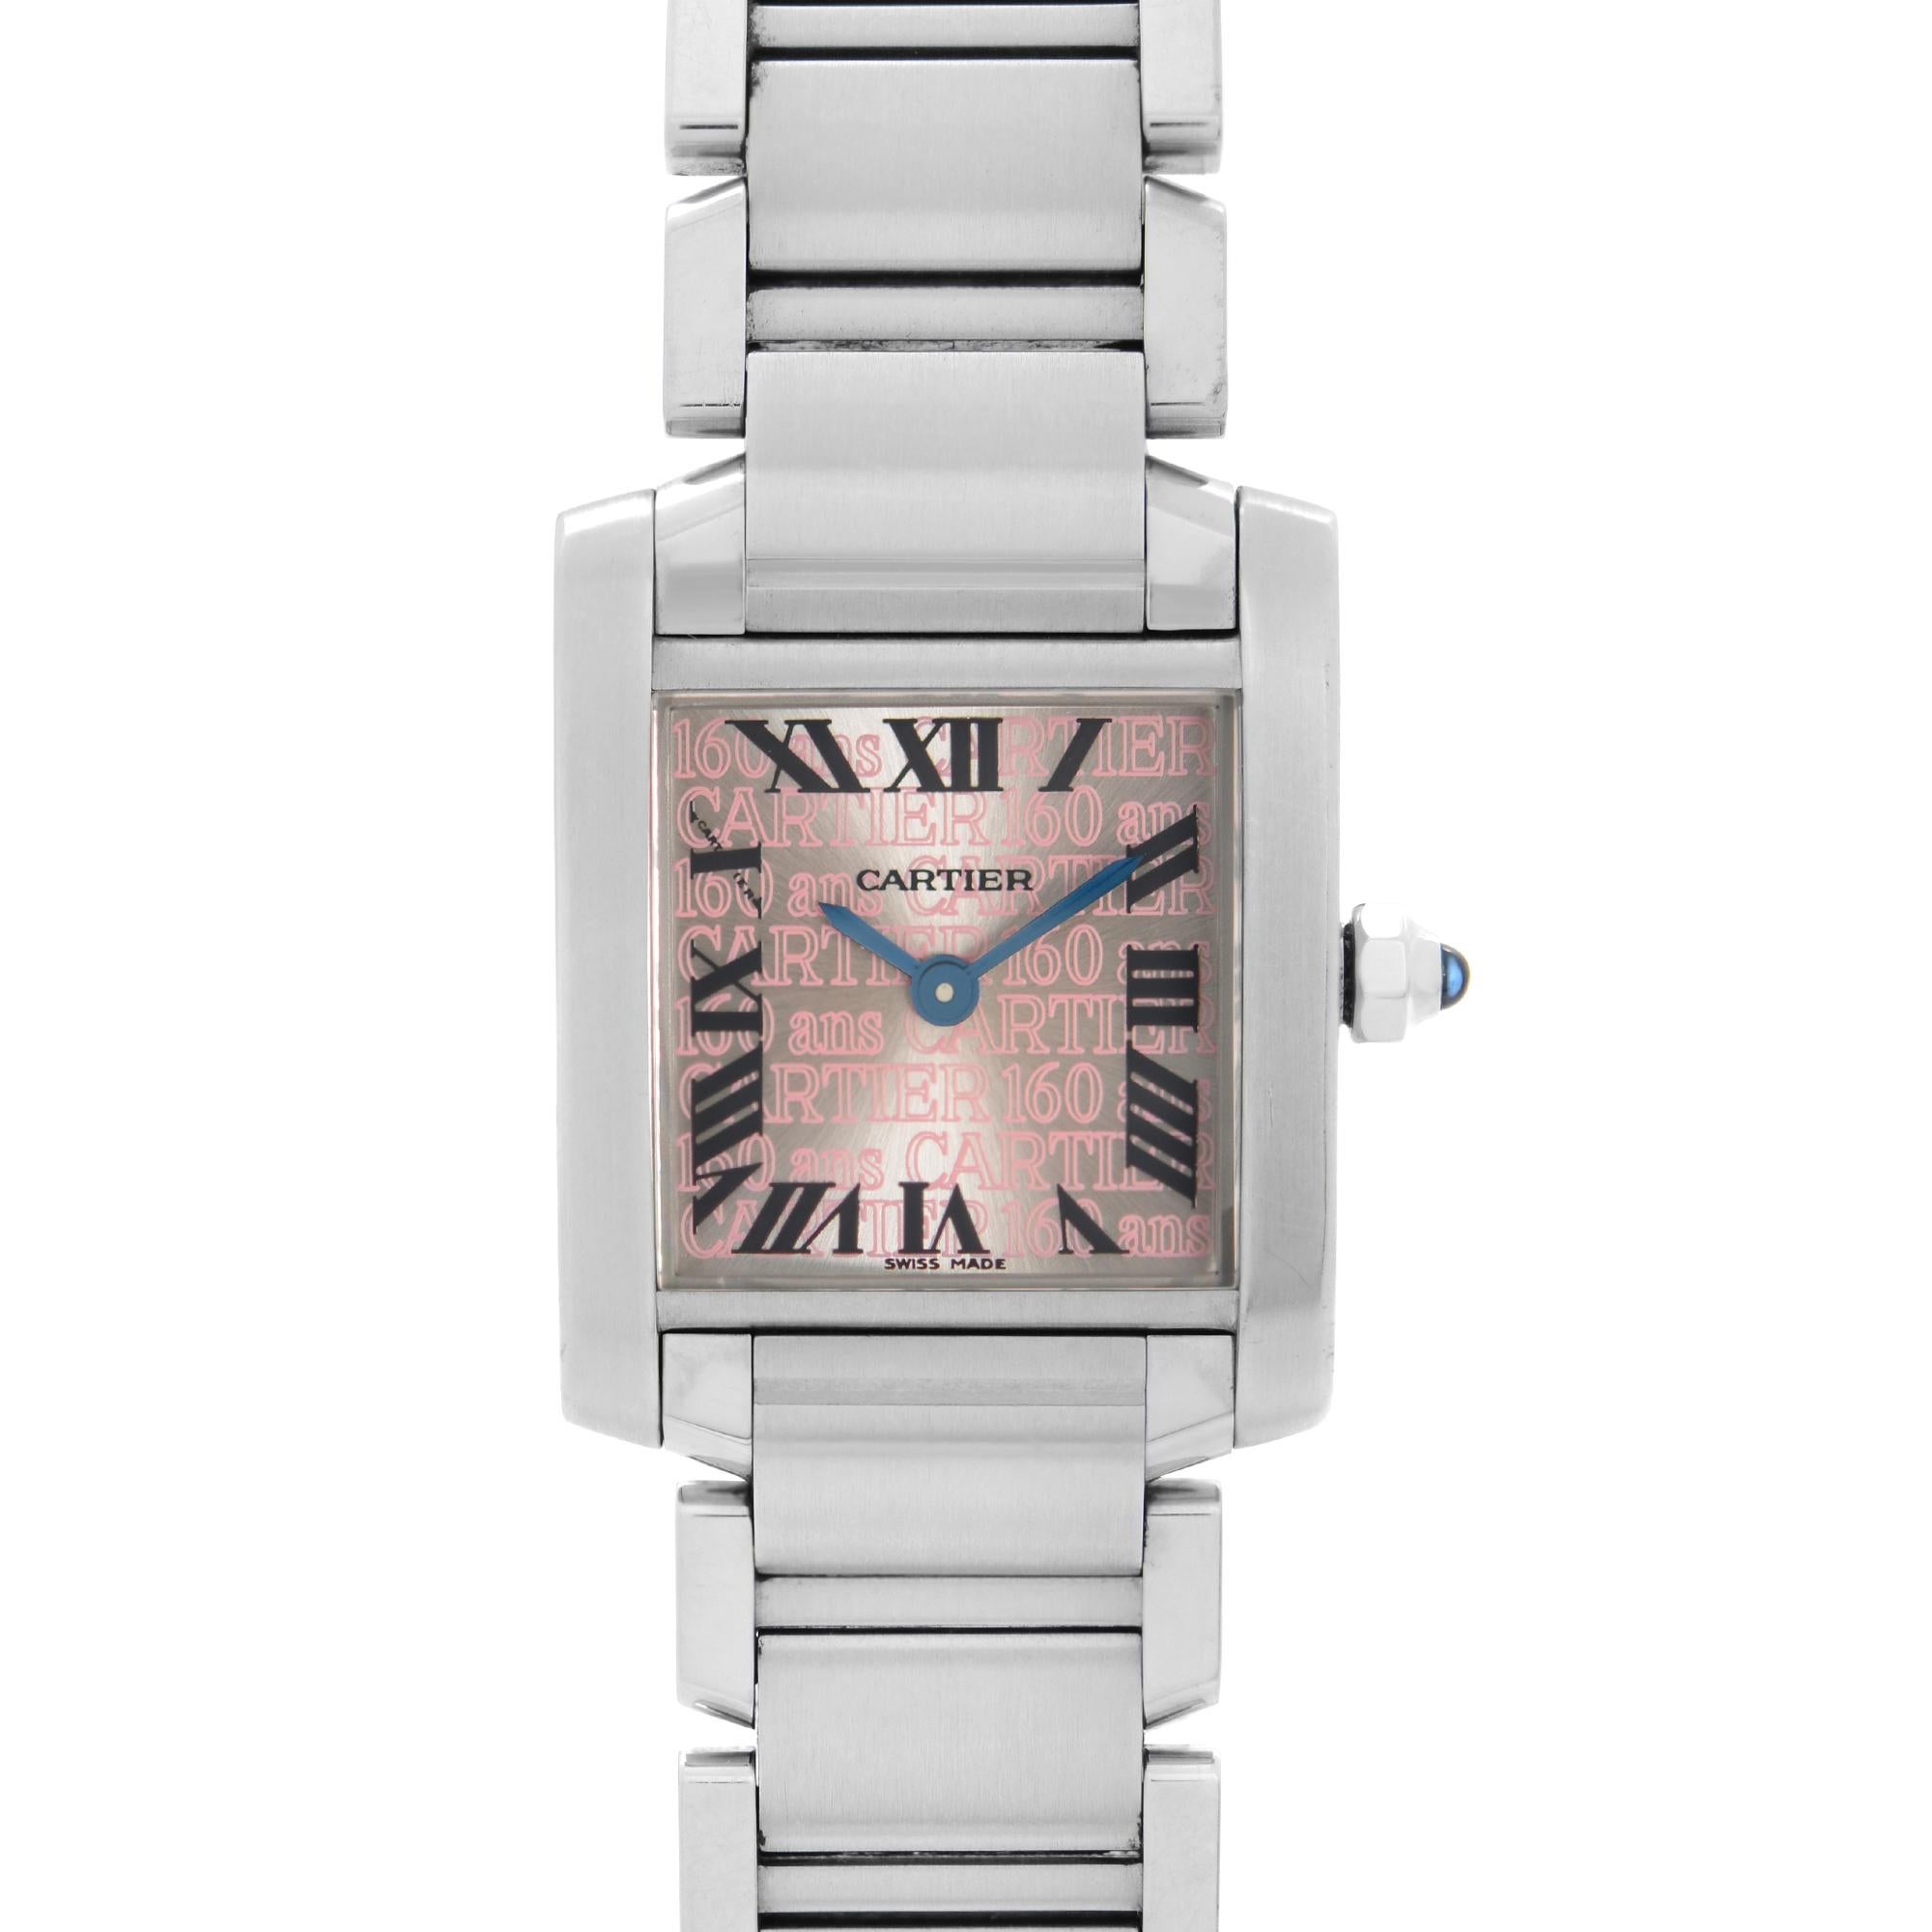 Cartier Tank Francaise 20mm 160th Anniversary Steel Pink Dial Ladies Watch 2384. 160th Year Anniversary Limited Edition. The dial is marked with Cartier 160. This Beautiful Timepiece is Powered by Quartz (Battery) Movement And Features: Stainless